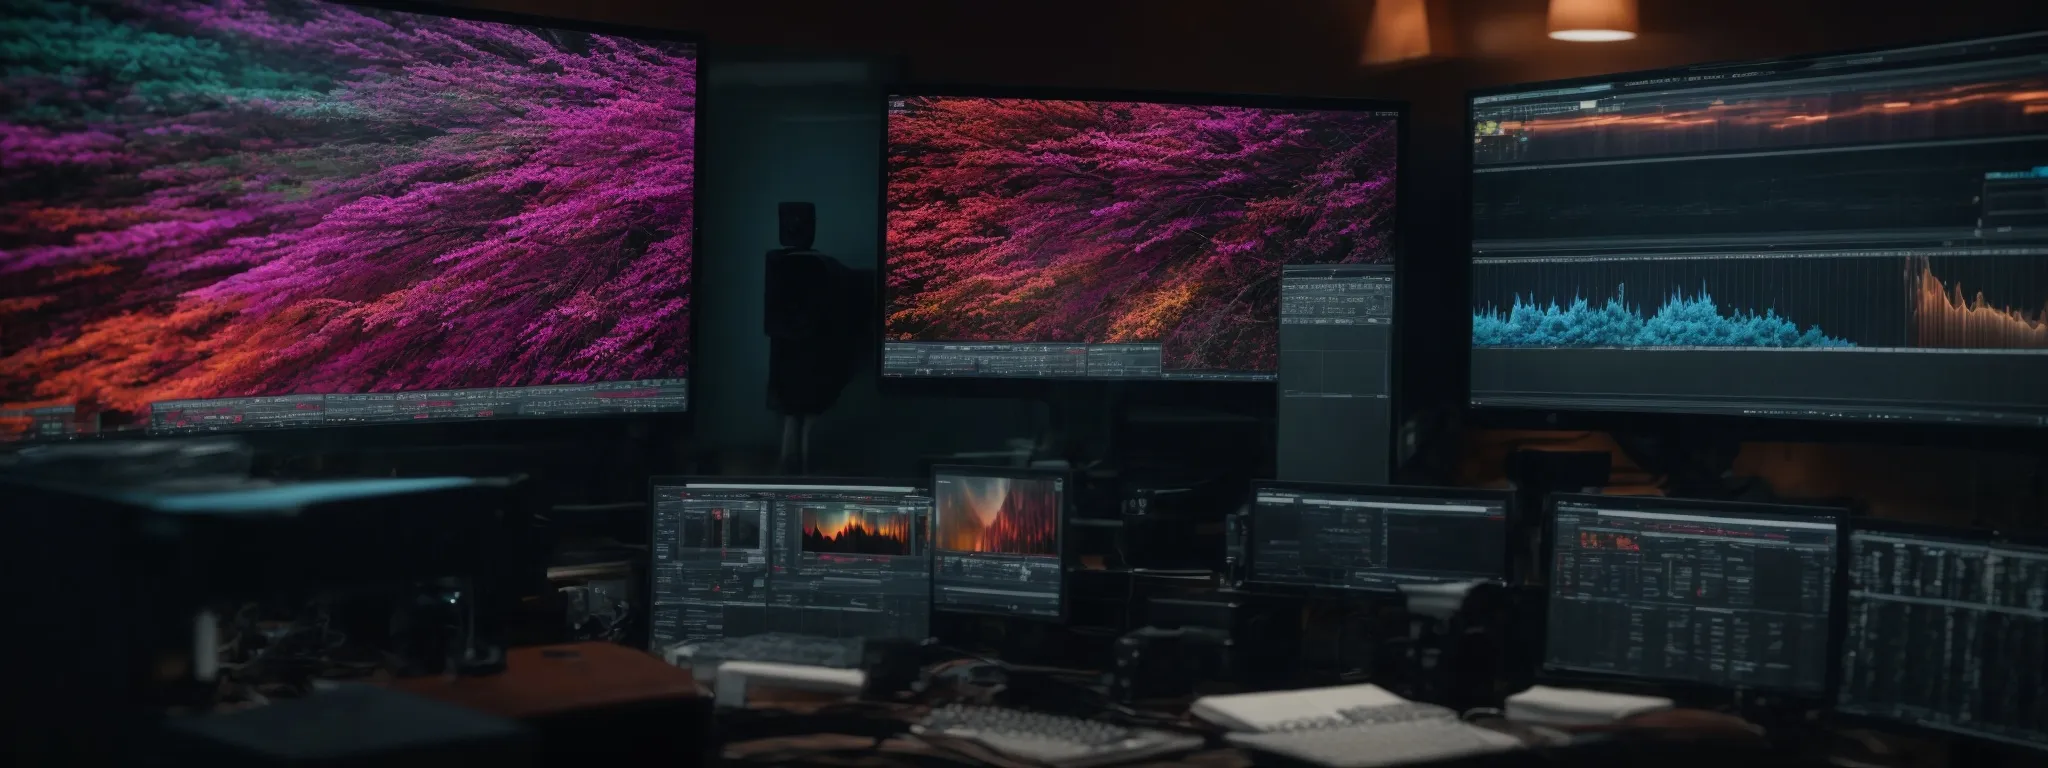 a filmmaker intently studies a computer screen displaying a vibrant, explosive visual effect sequence within a sophisticated video editing software interface.